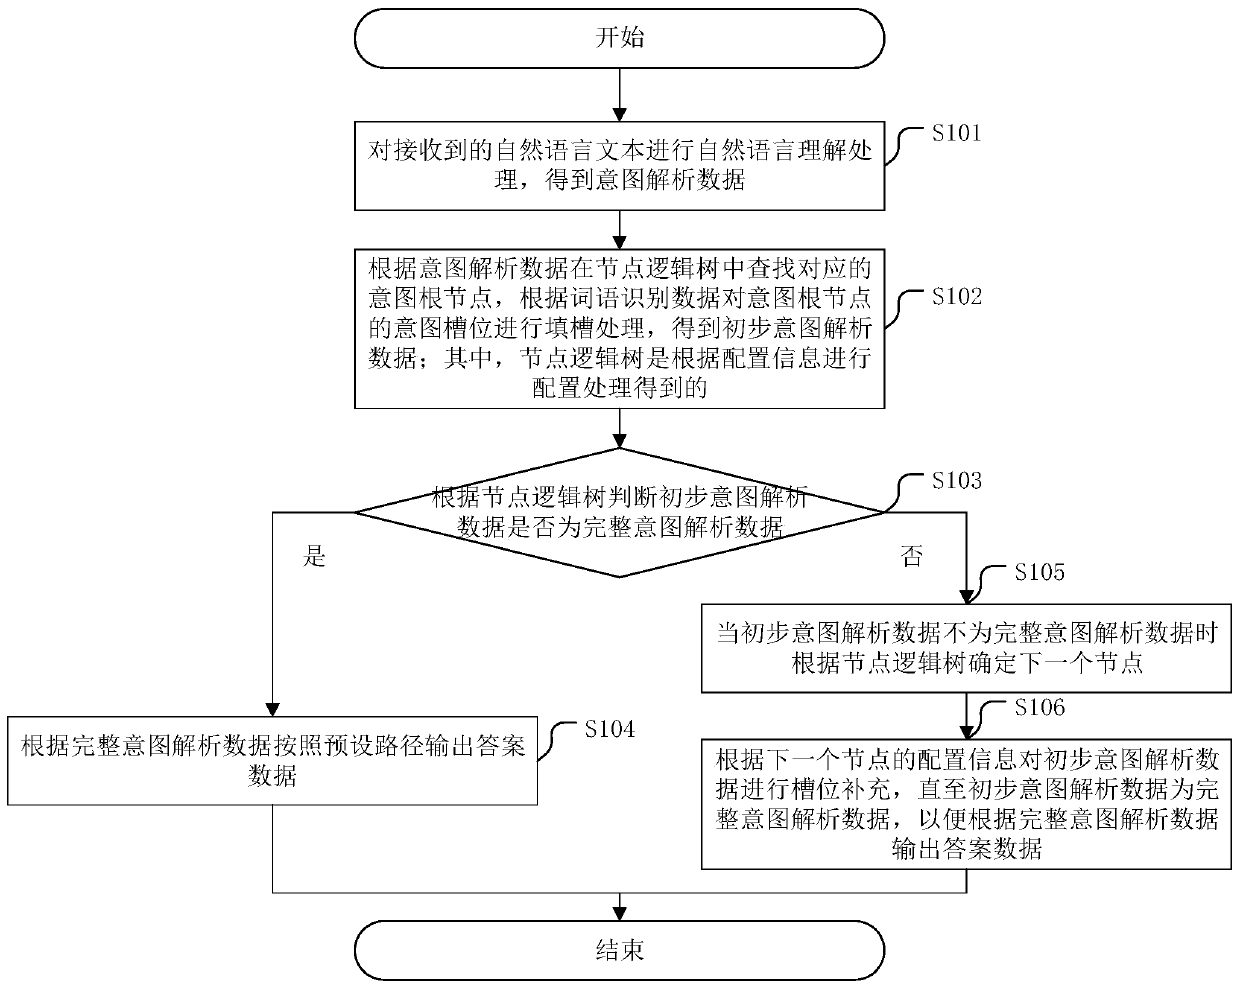 Dialogue management method and a related device